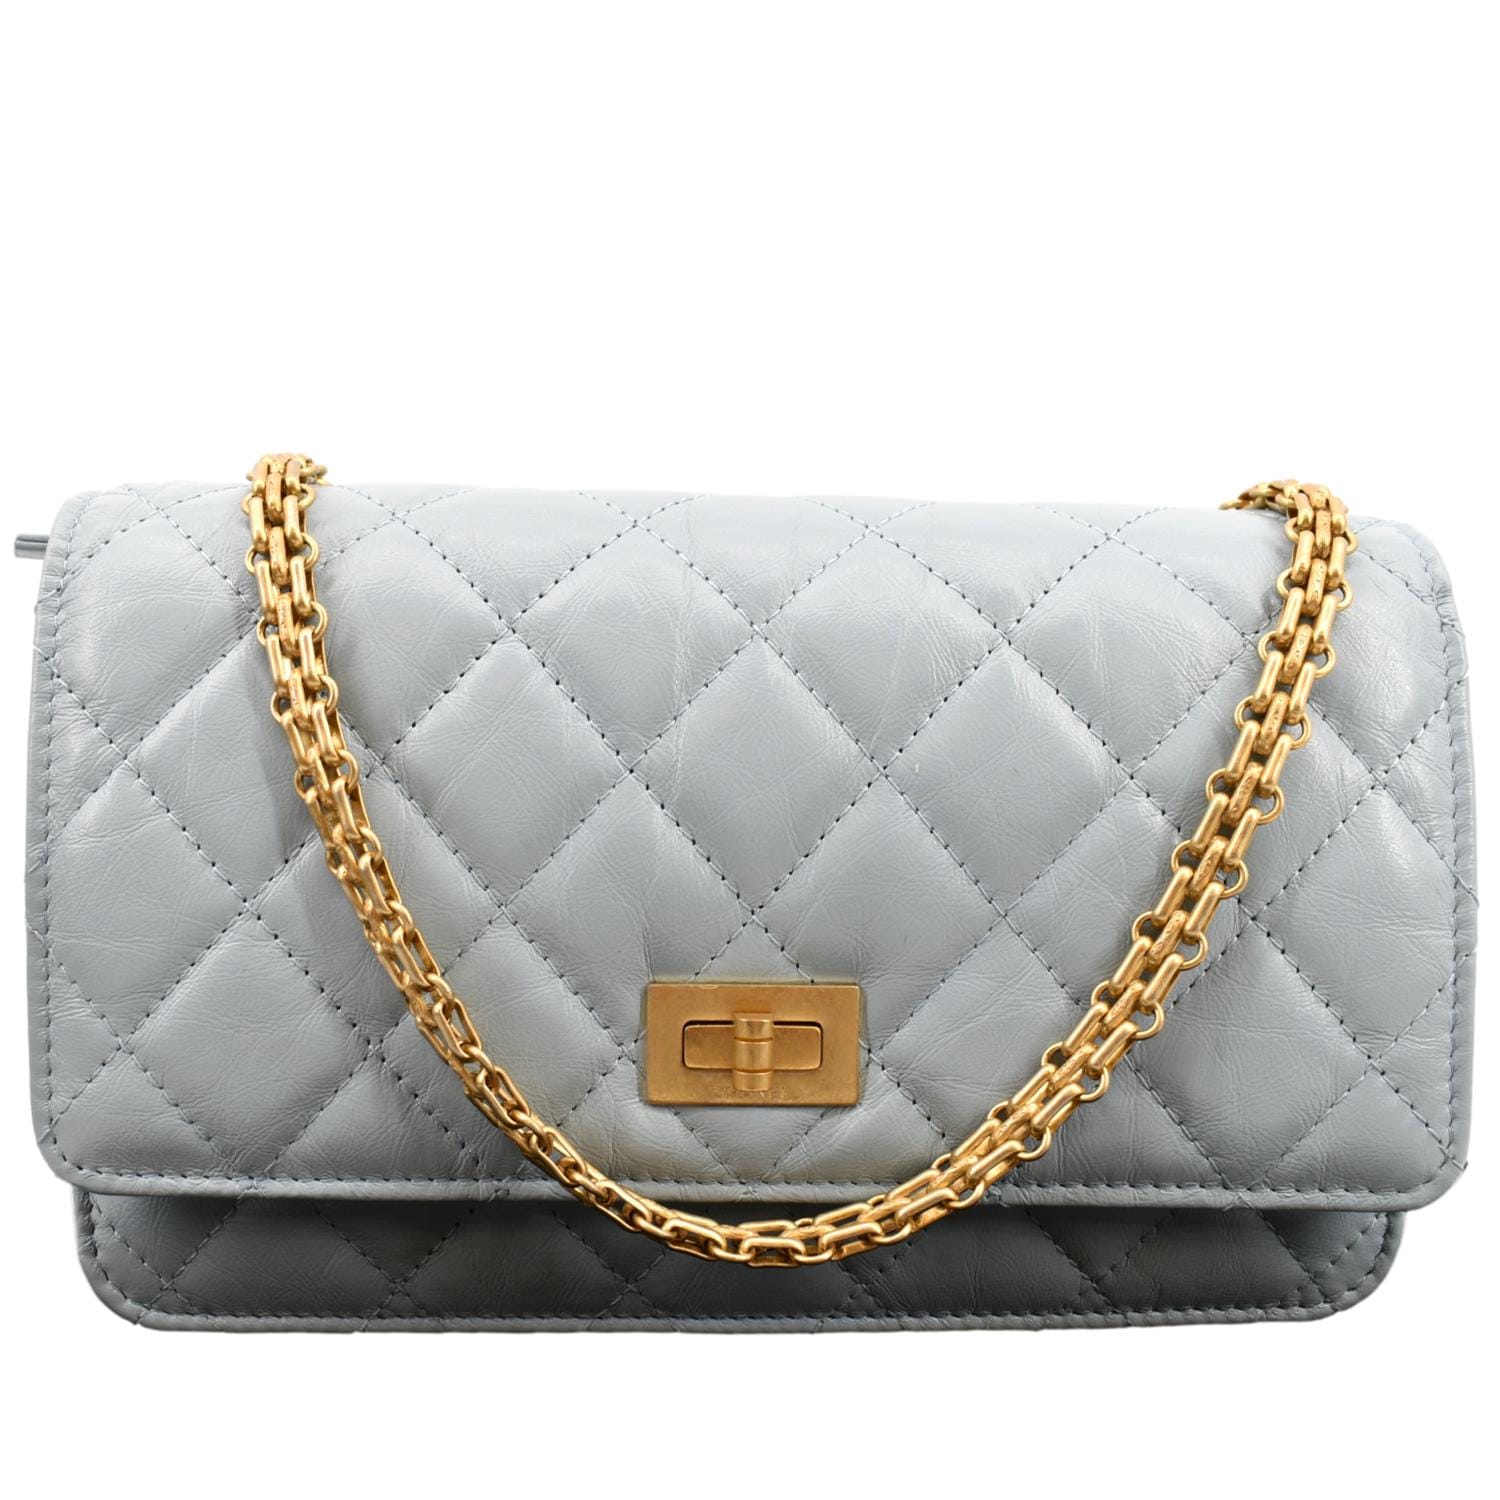 chanel woc classic quilted bag